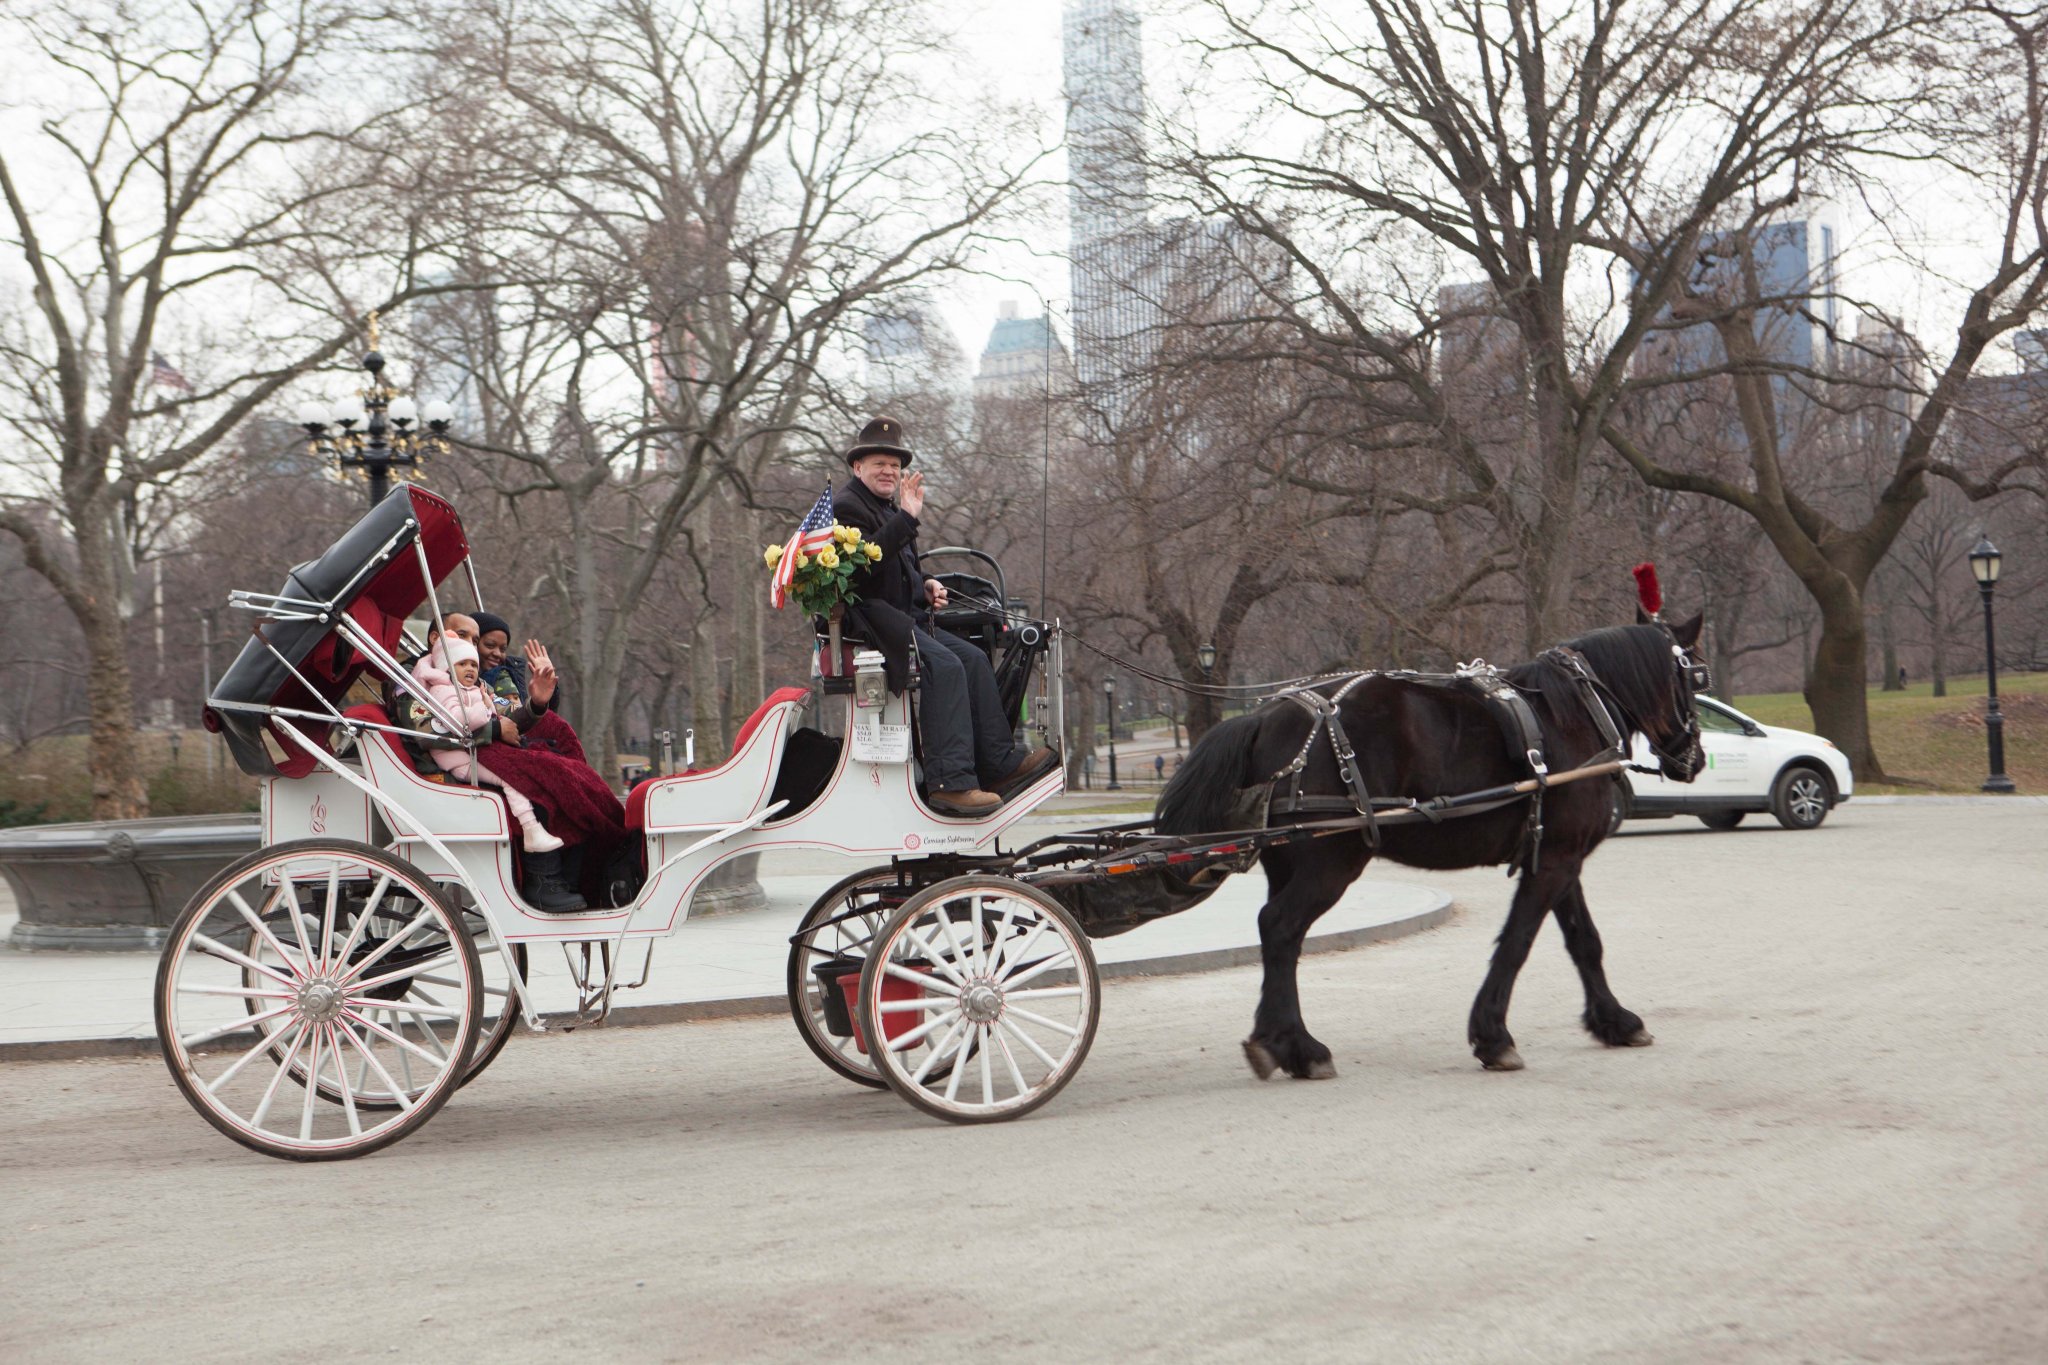 Carriage Ride Proposal In Central Park | Proposal Ideas and Planning